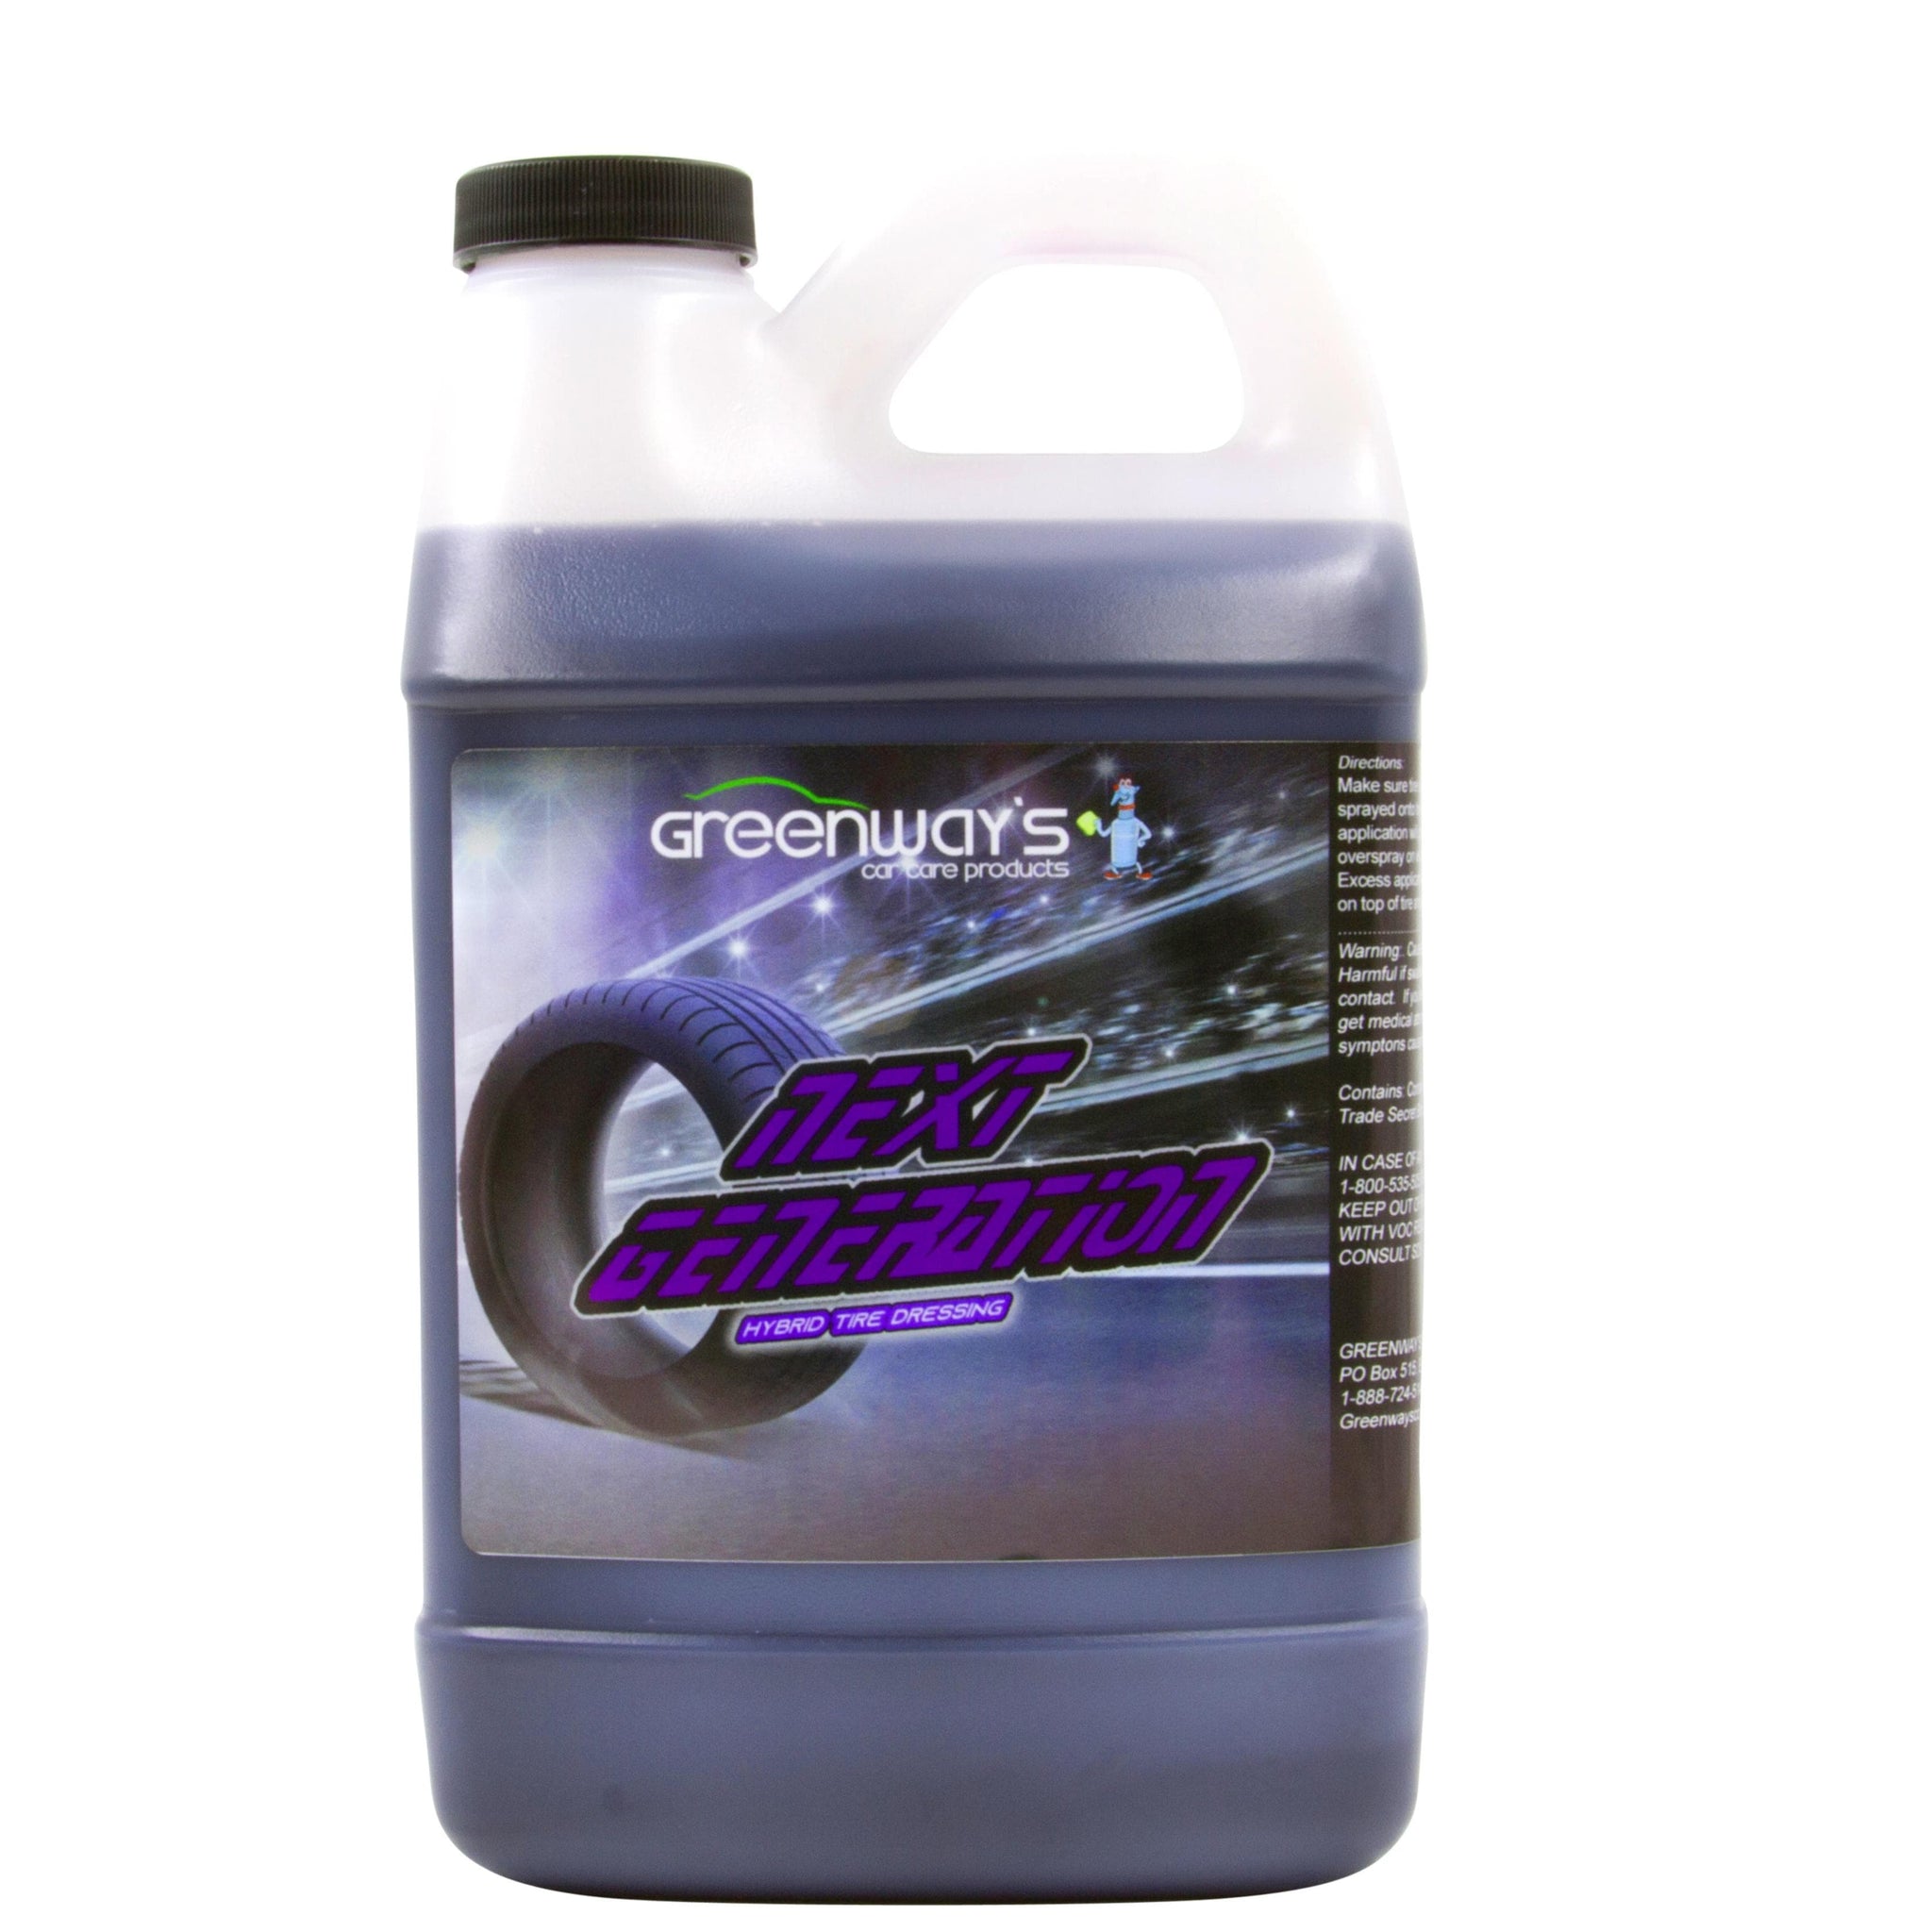 Greenway’s Next Generation Tire Dressing, high gloss shine, excellent leveling property, silicone and sling-free. 64 ounces.